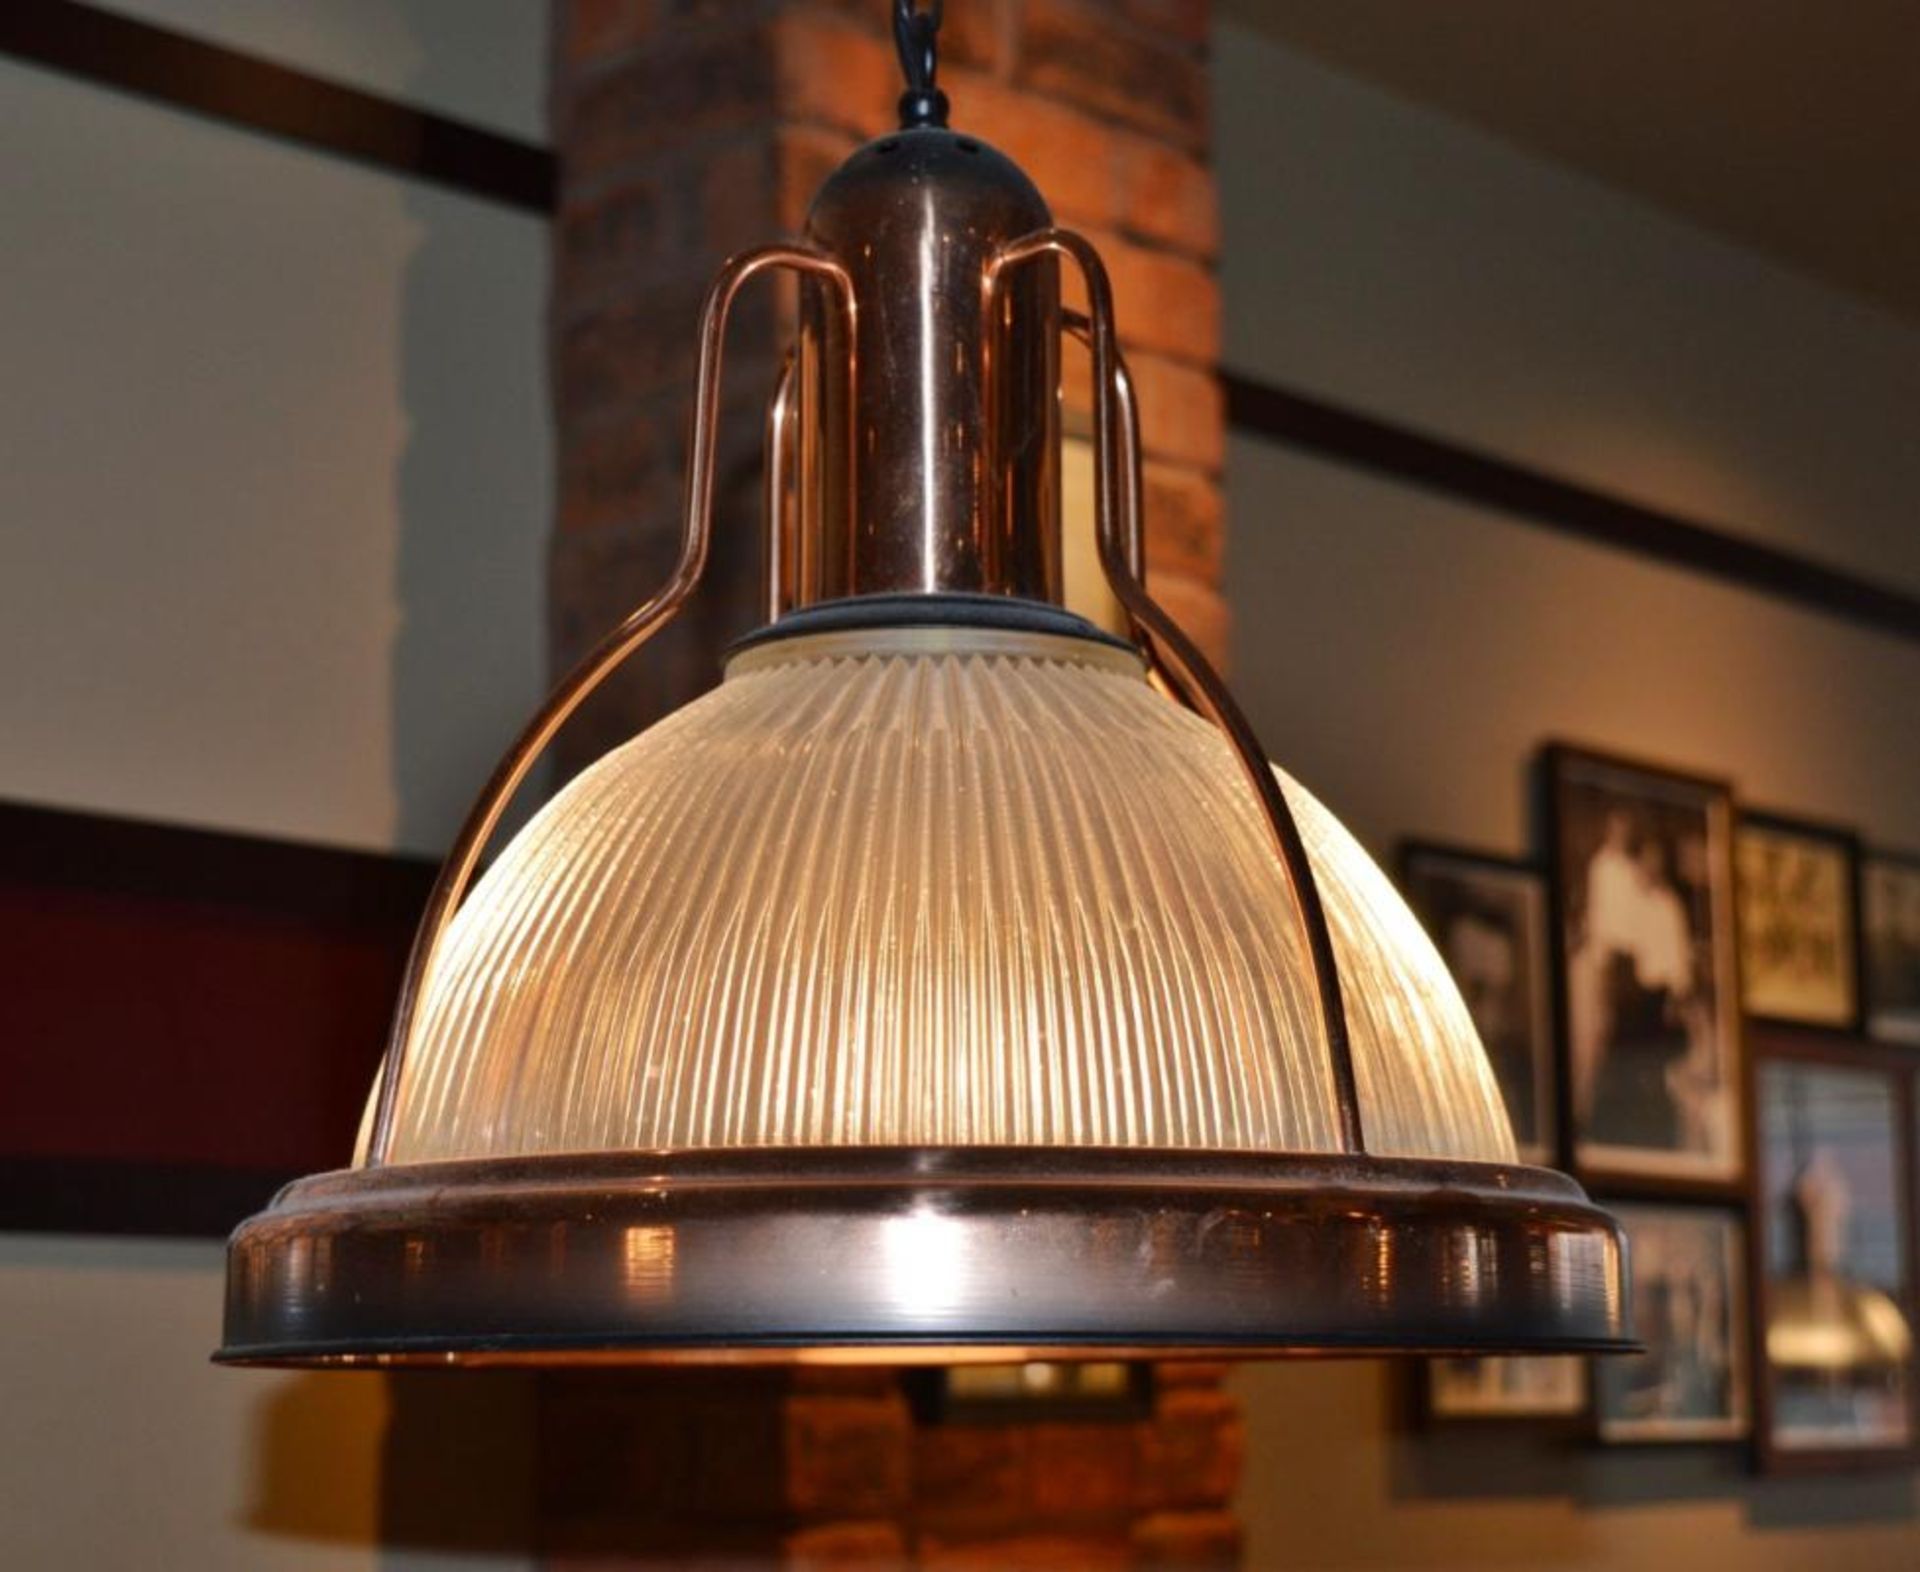 7 x Industrial-style Pendant Light Fittings In Copper With Pleated Glass Shades - Image 2 of 5